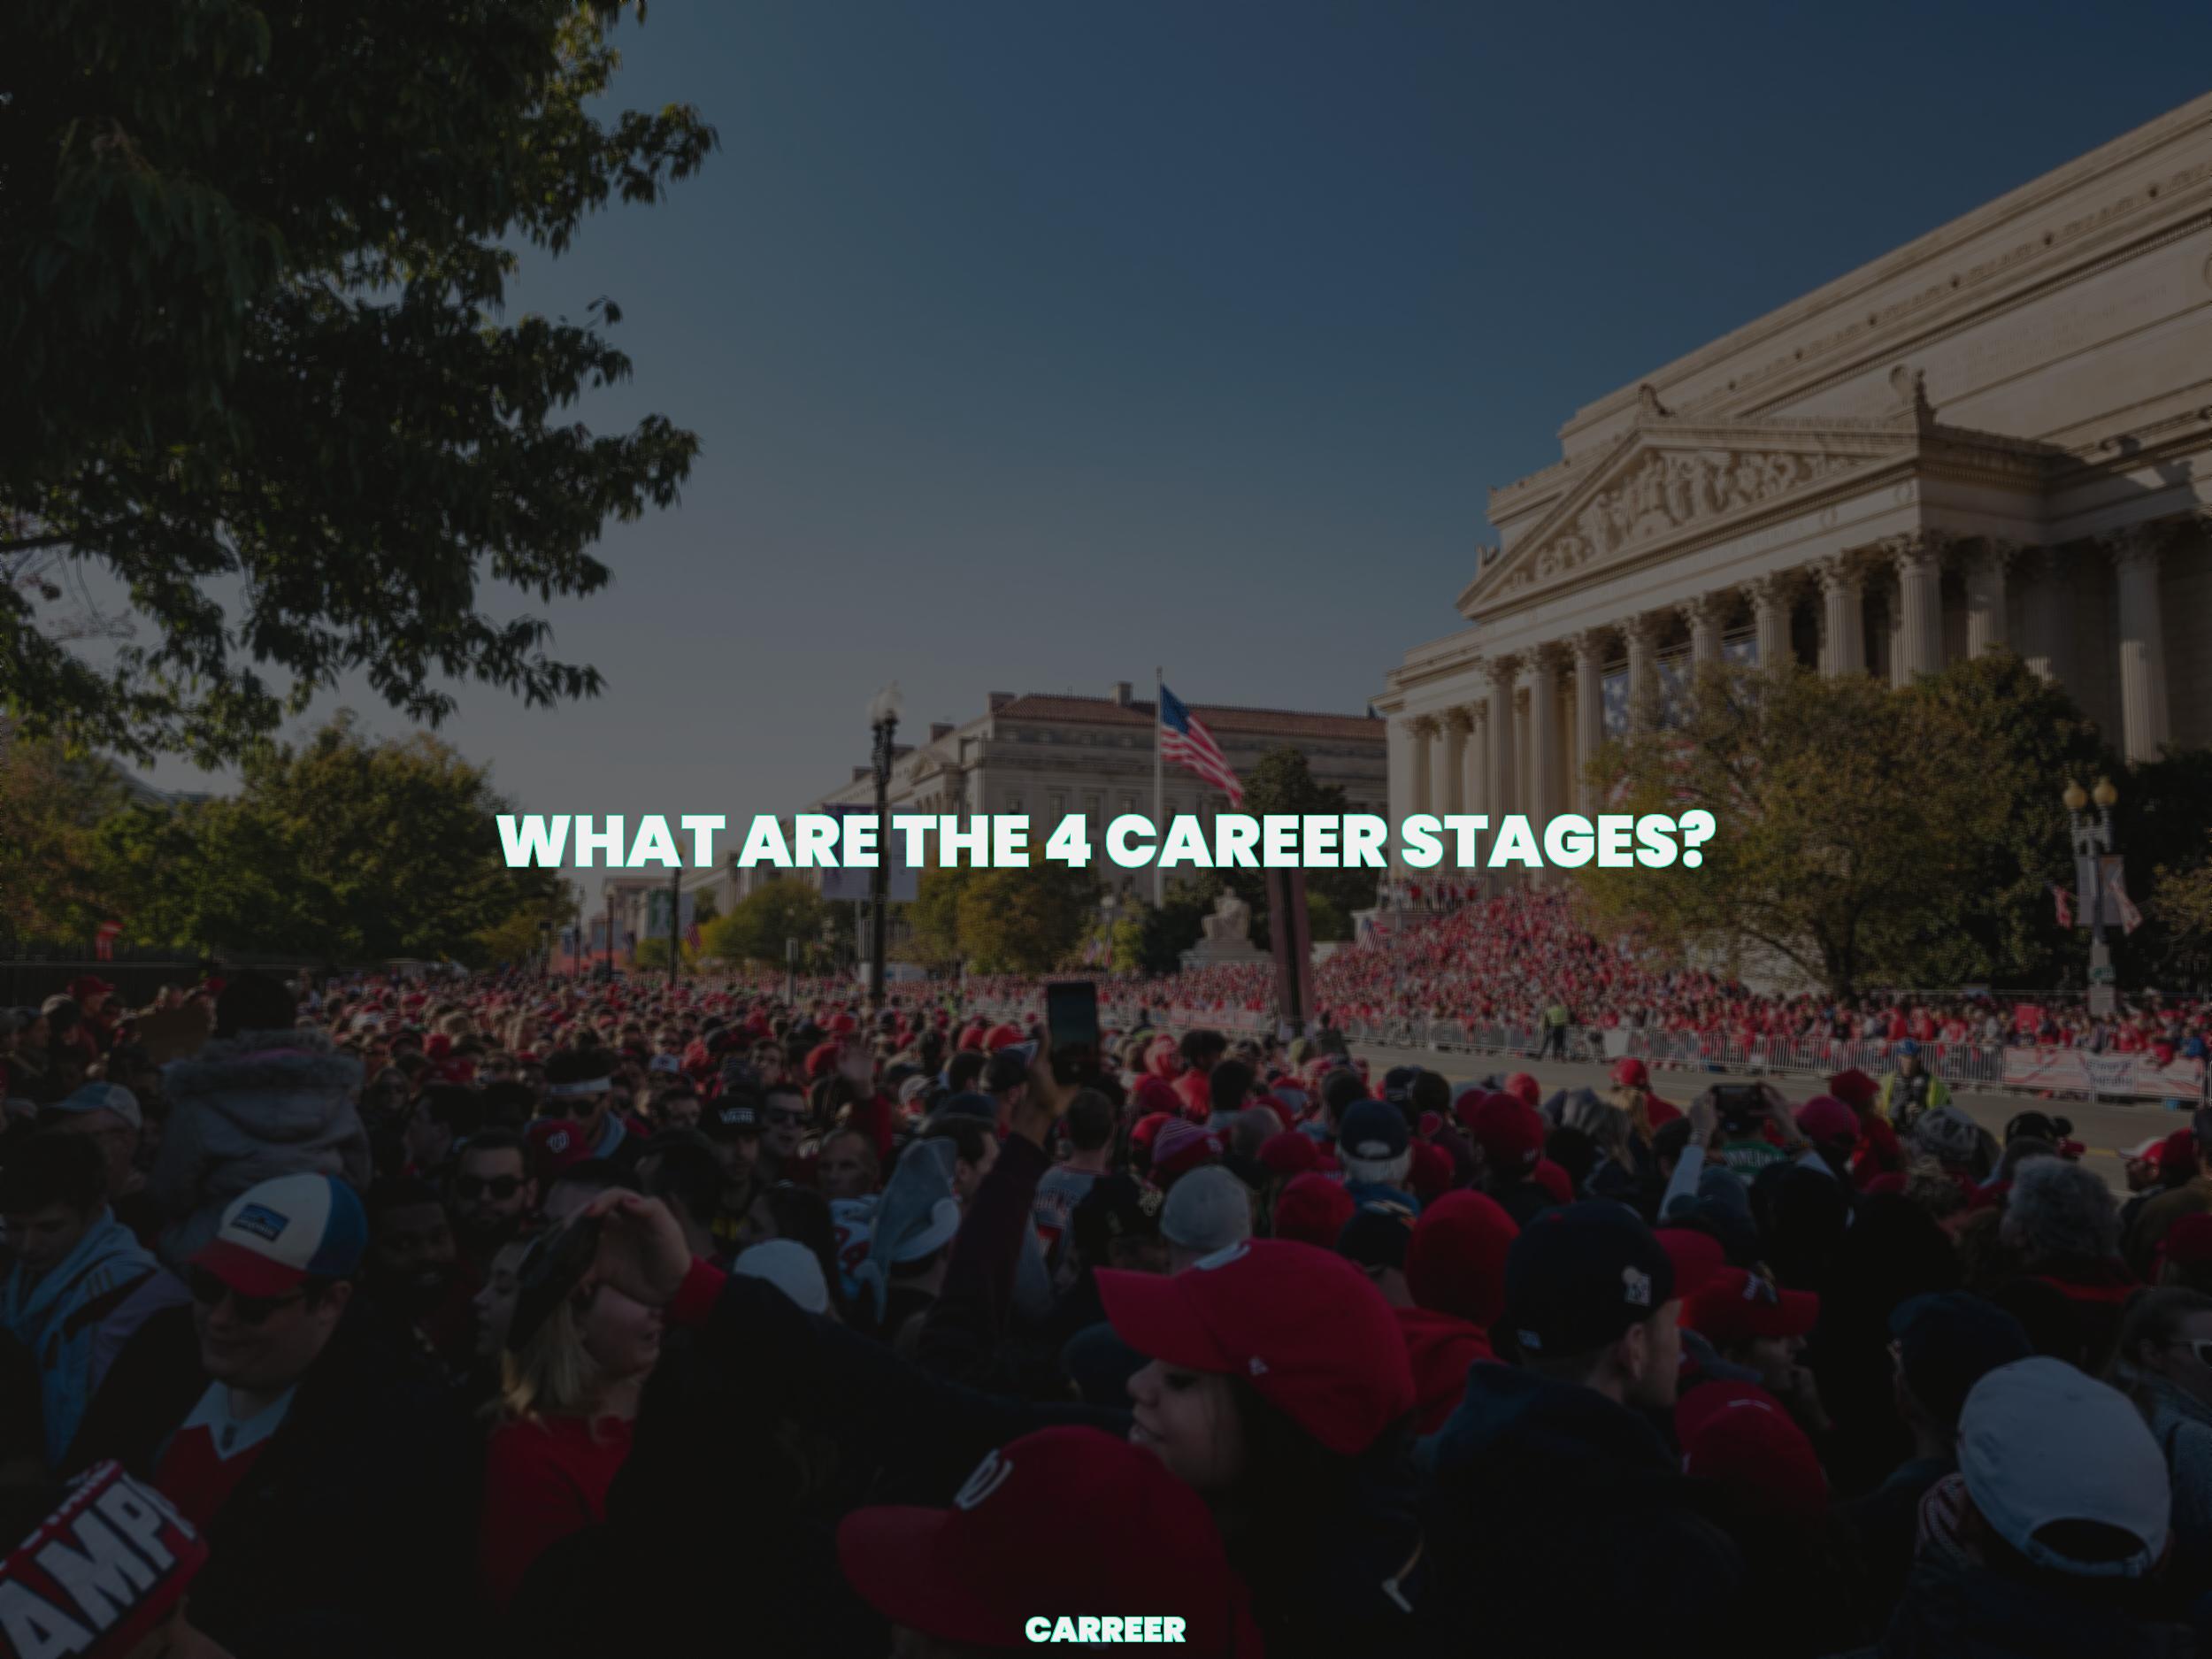 What are the 4 career stages?